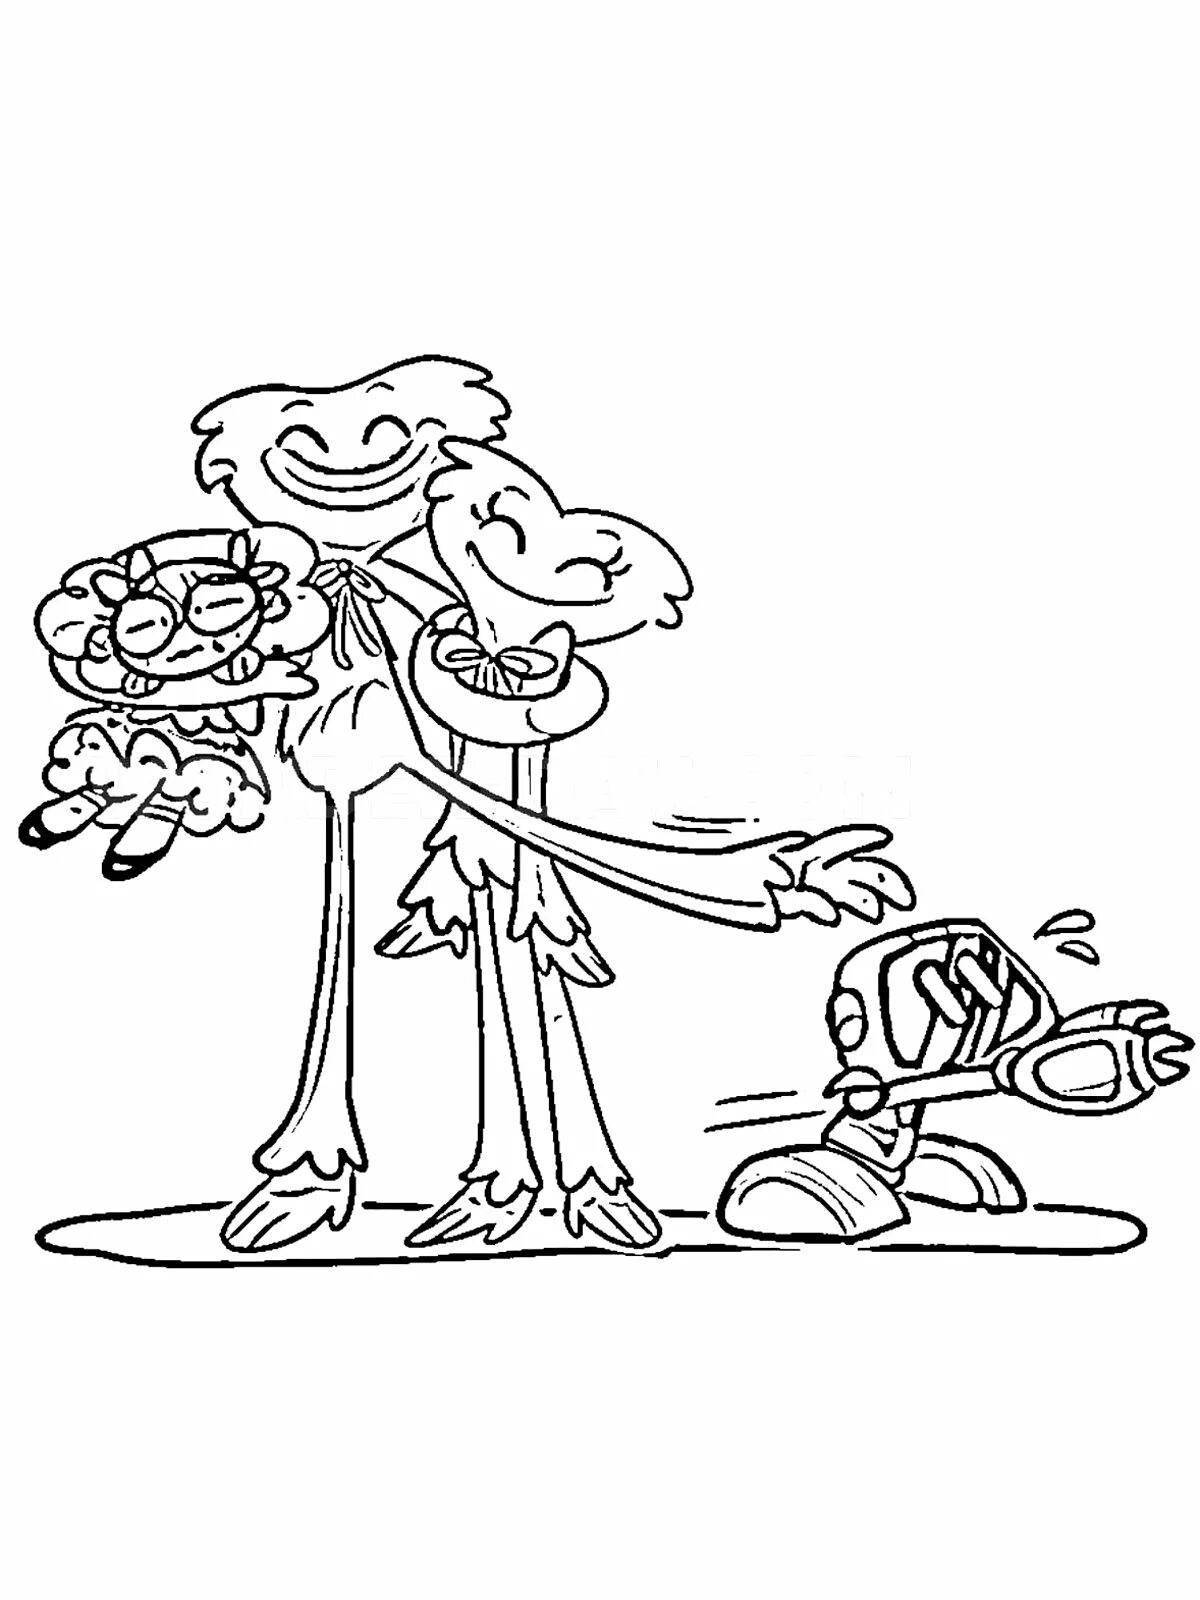 Coloring page adorable daddy leggy